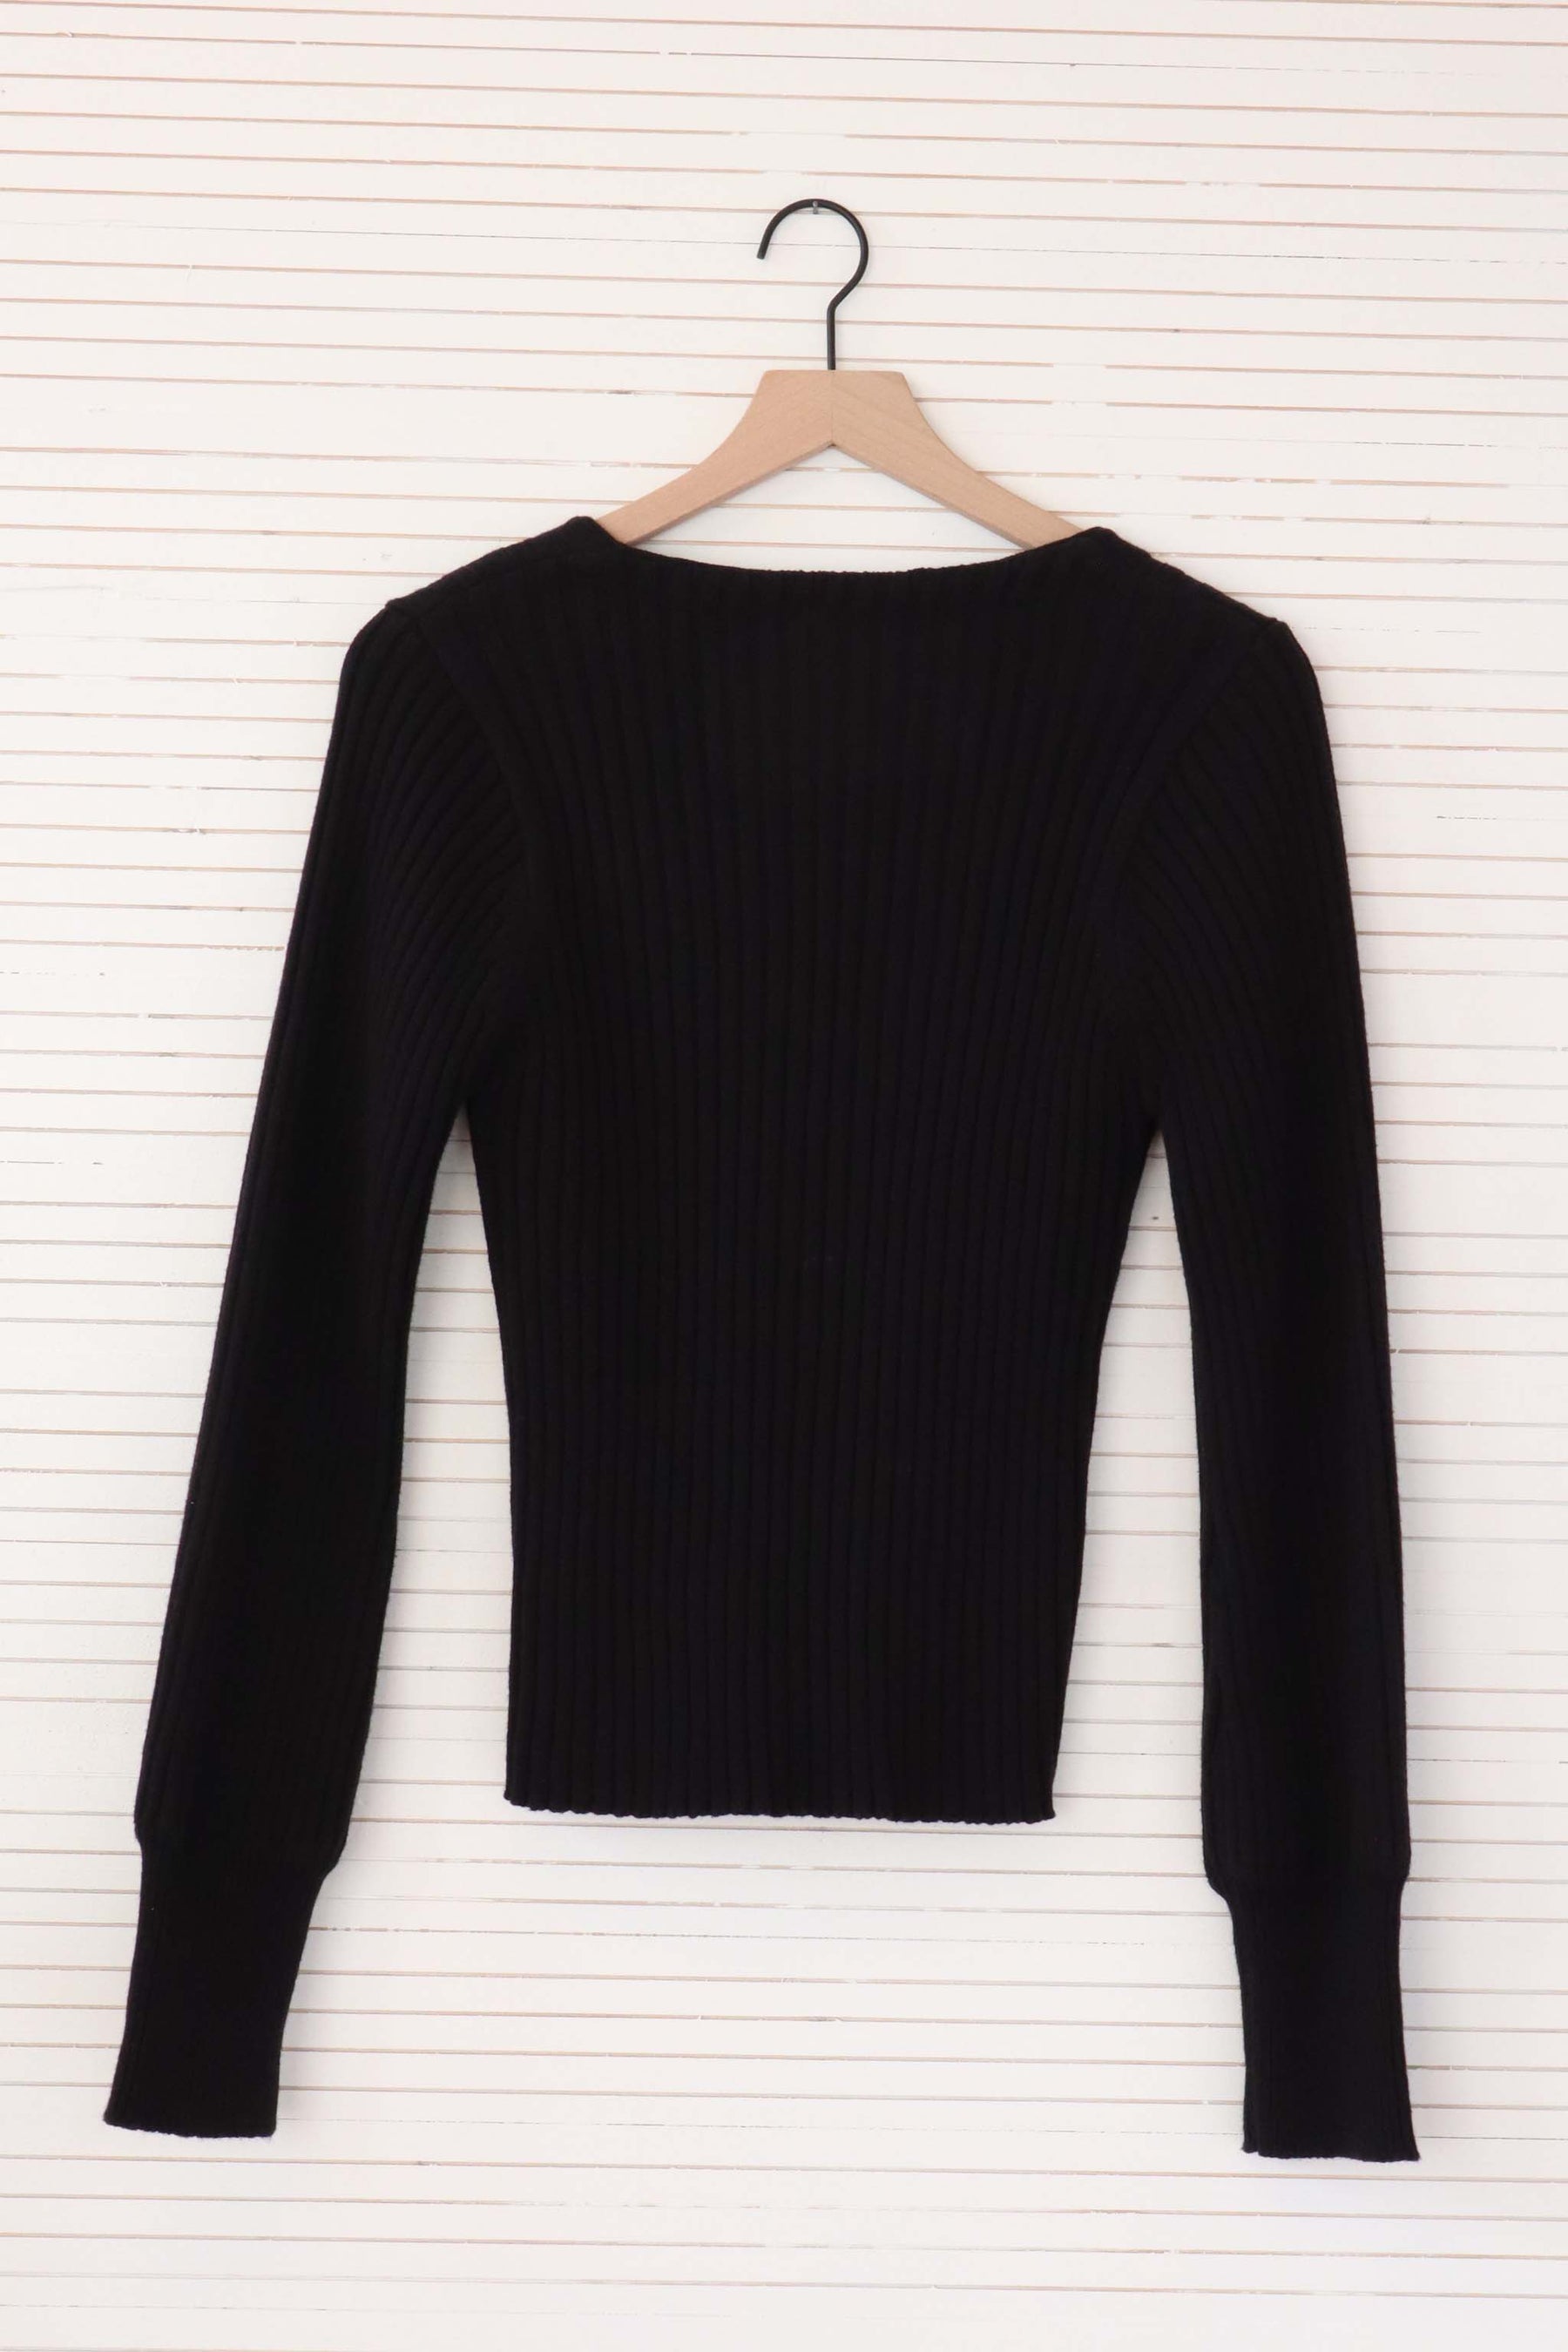 Evelyn Sweater Cardigan Top